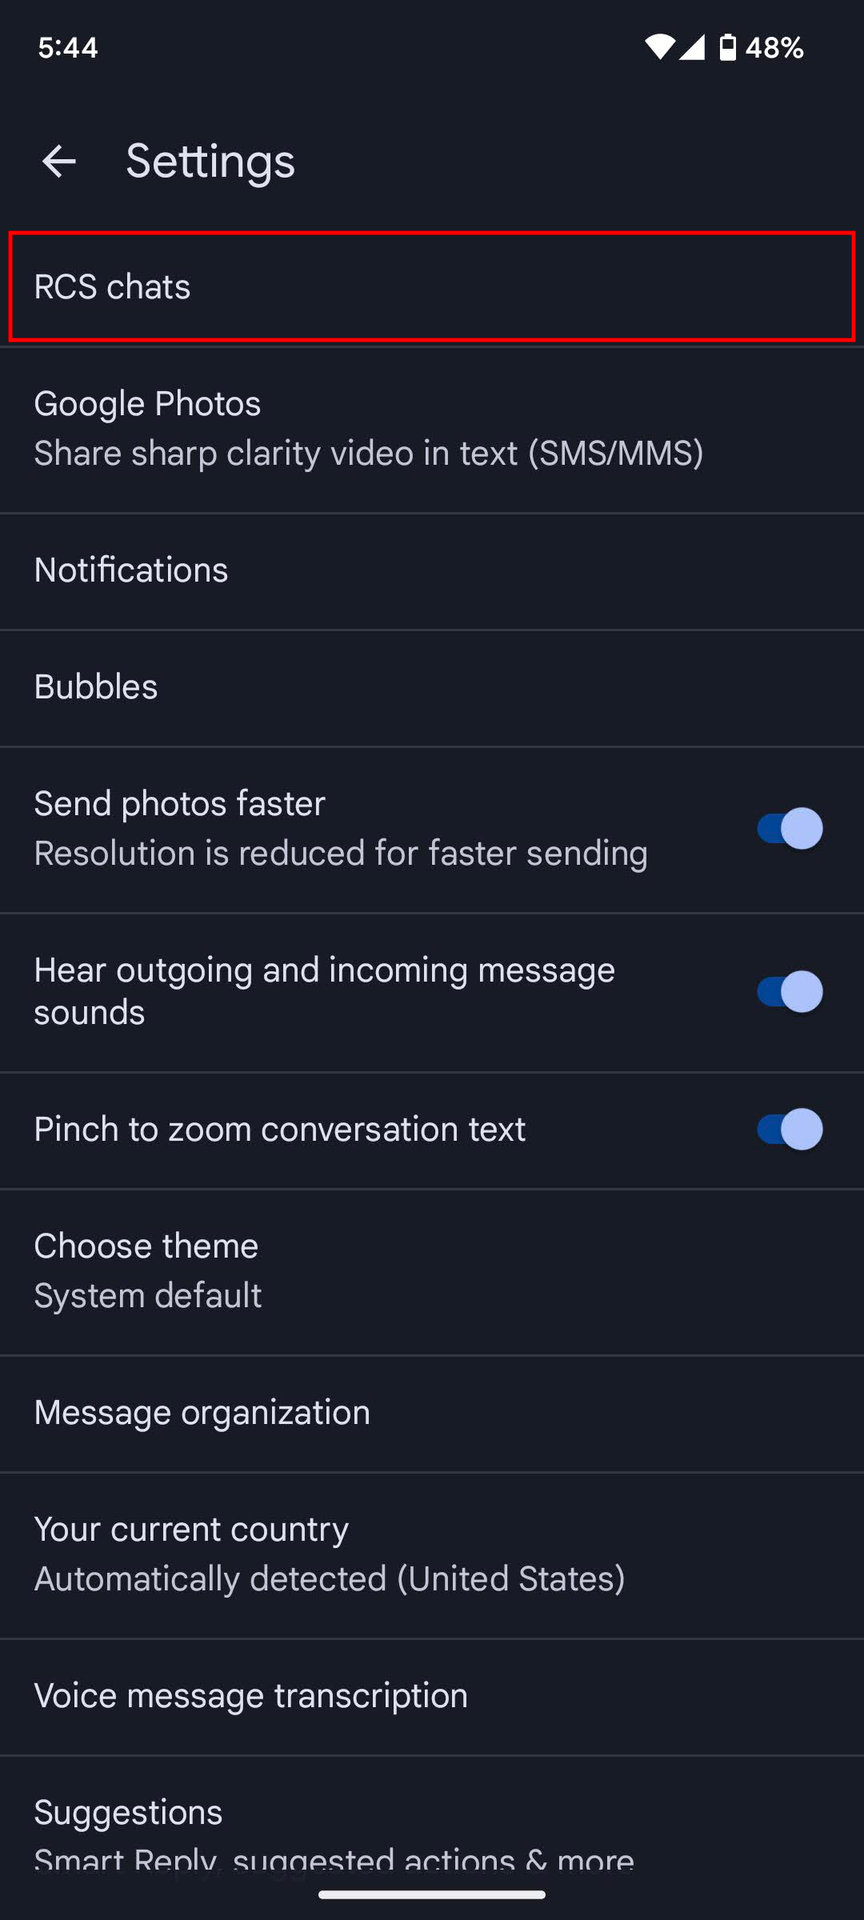 How to enable or disable RCS messaging on an Android phone (3)